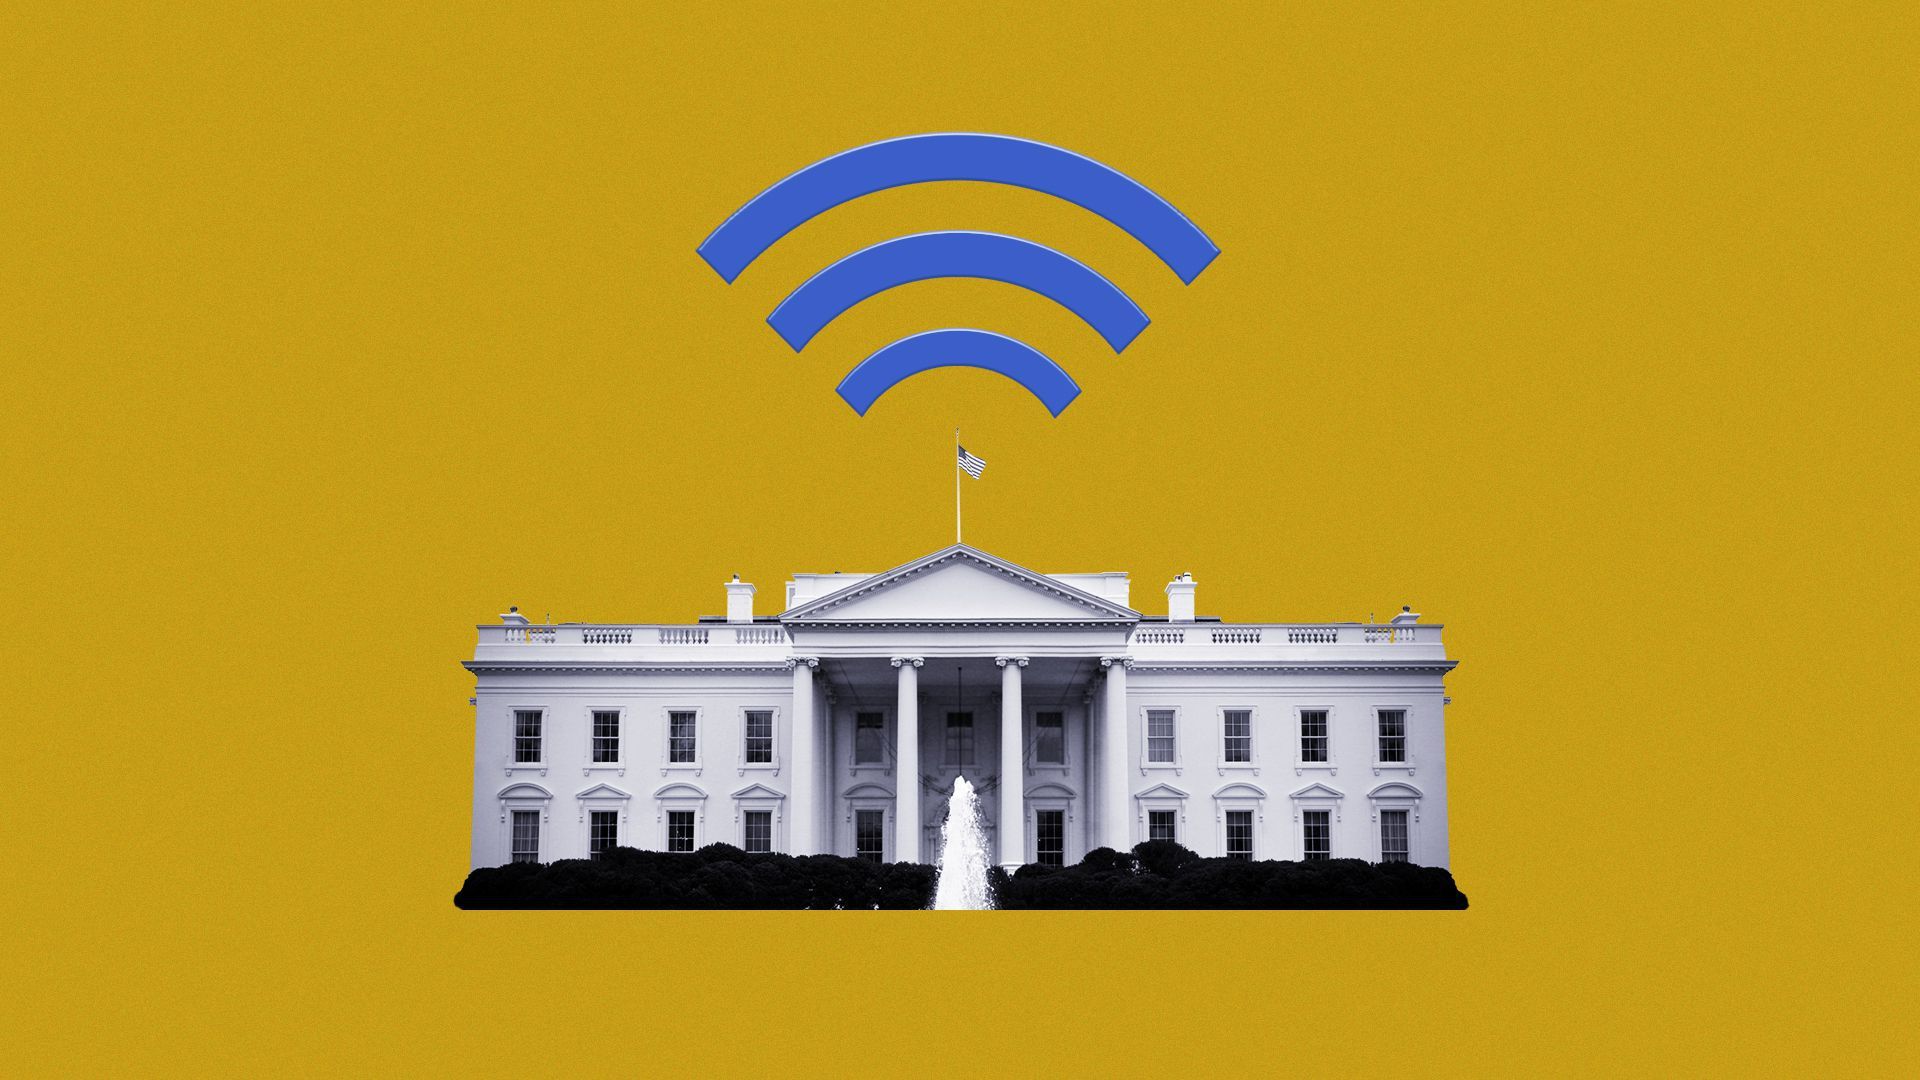 An illustration of the White House and a broadband signal above it.